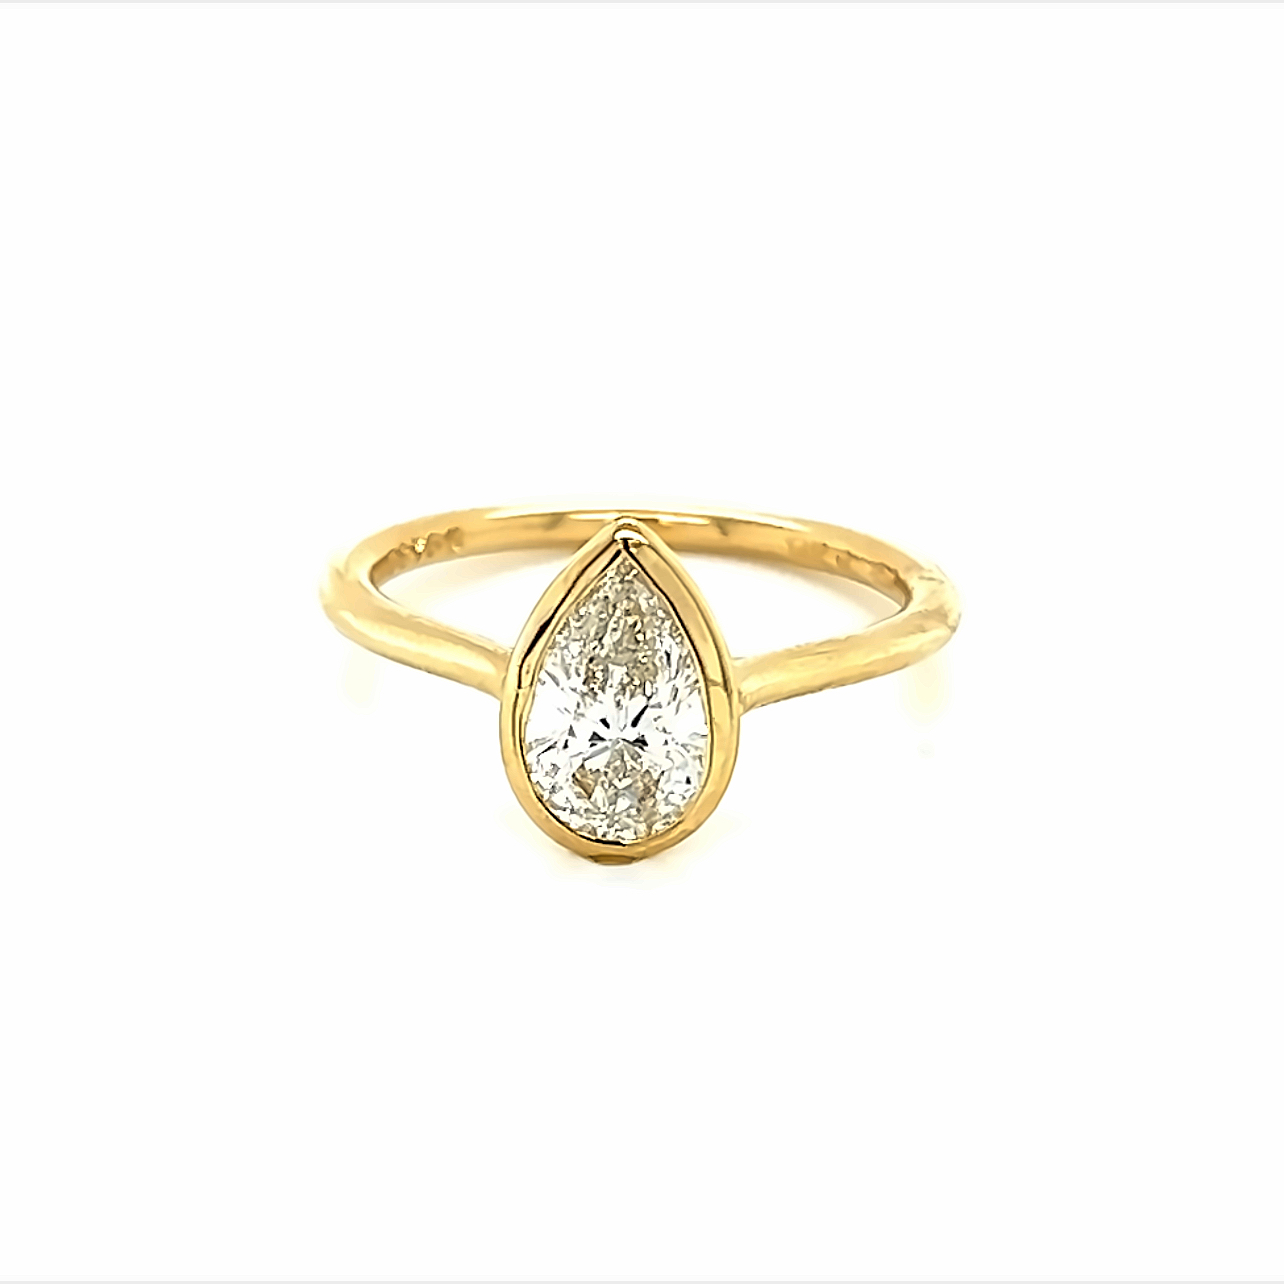 14 Karat yellow gold bezel set engagement ring with one1.01ct Pear G SI2 Diamond